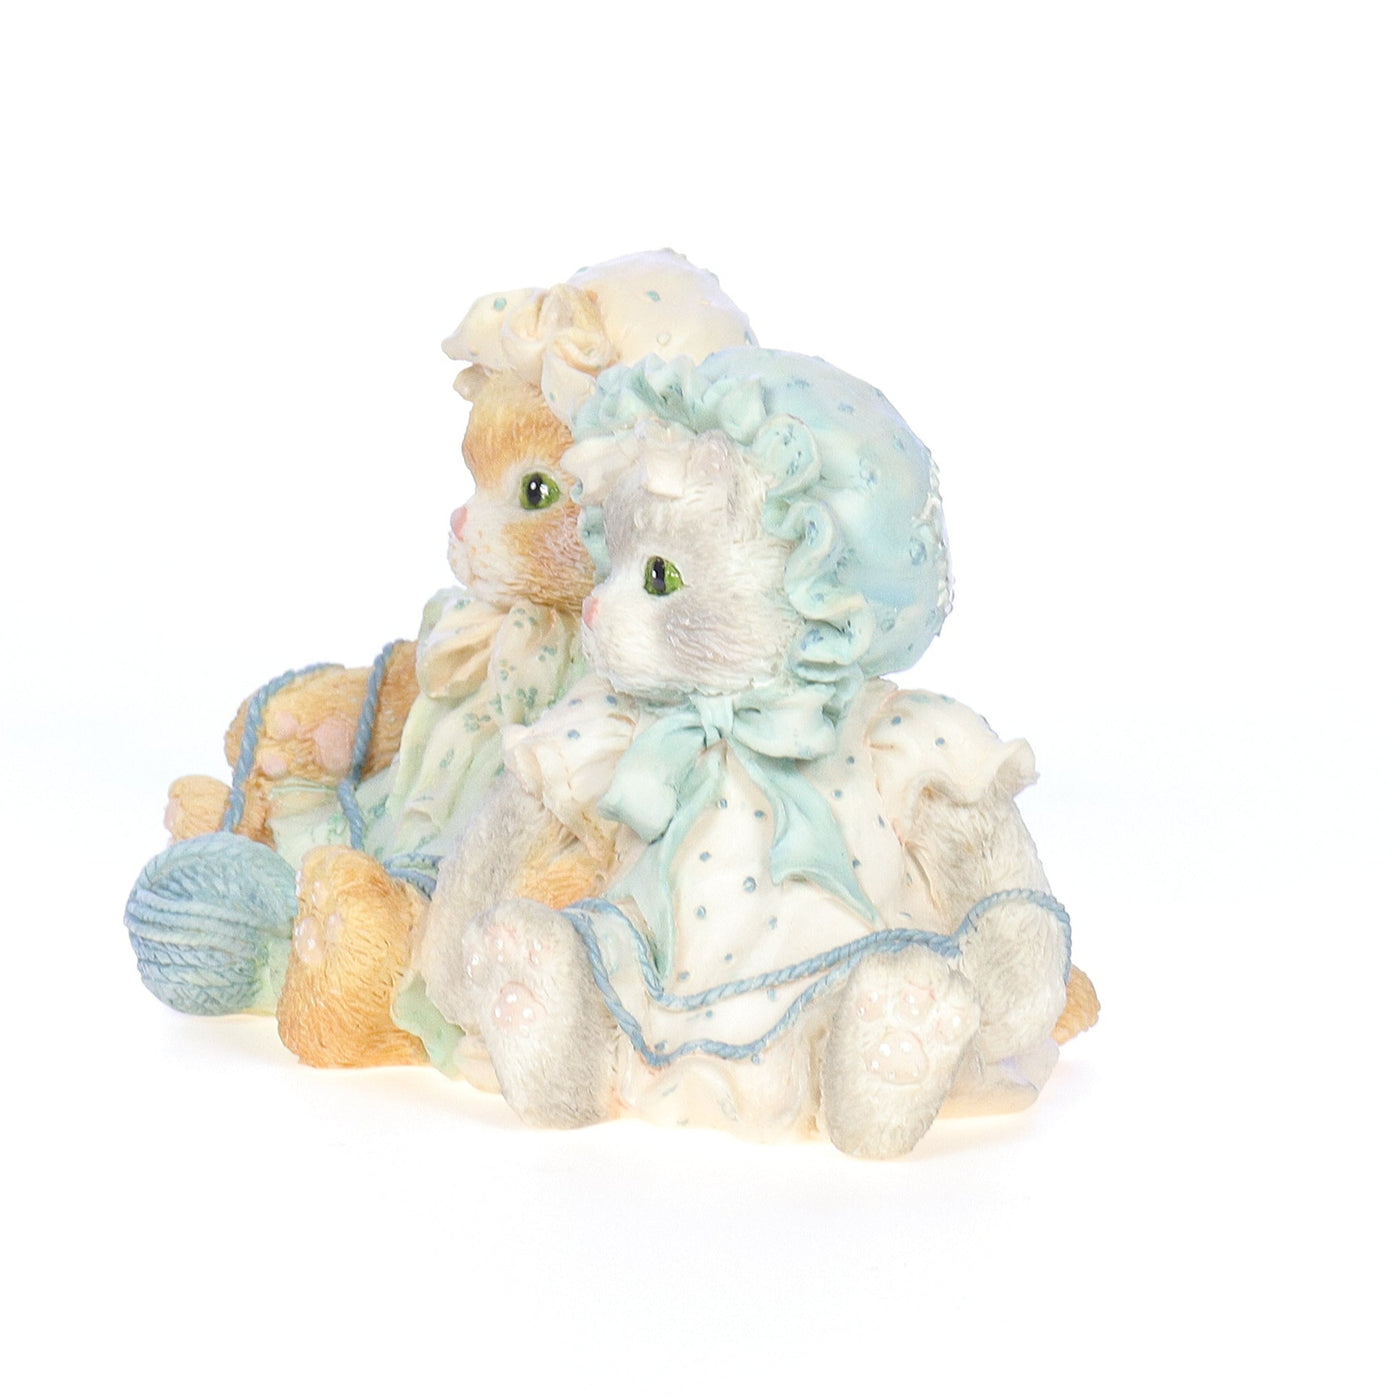 Calico_Kittens_Youre_Always_There_When_I_Need_You_Friendship_Figurine_1992